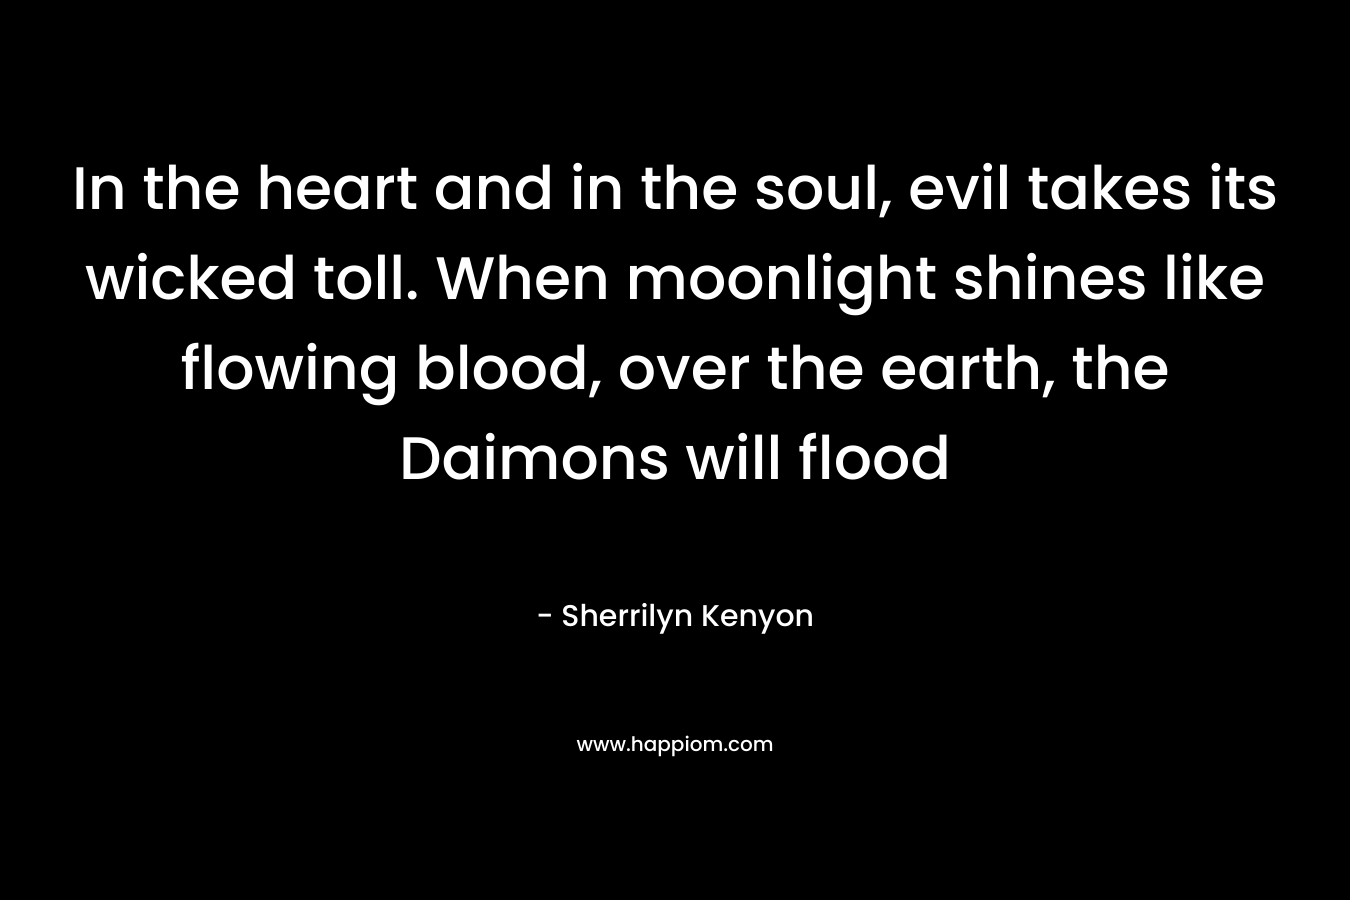 In the heart and in the soul, evil takes its wicked toll. When moonlight shines like flowing blood, over the earth, the Daimons will flood